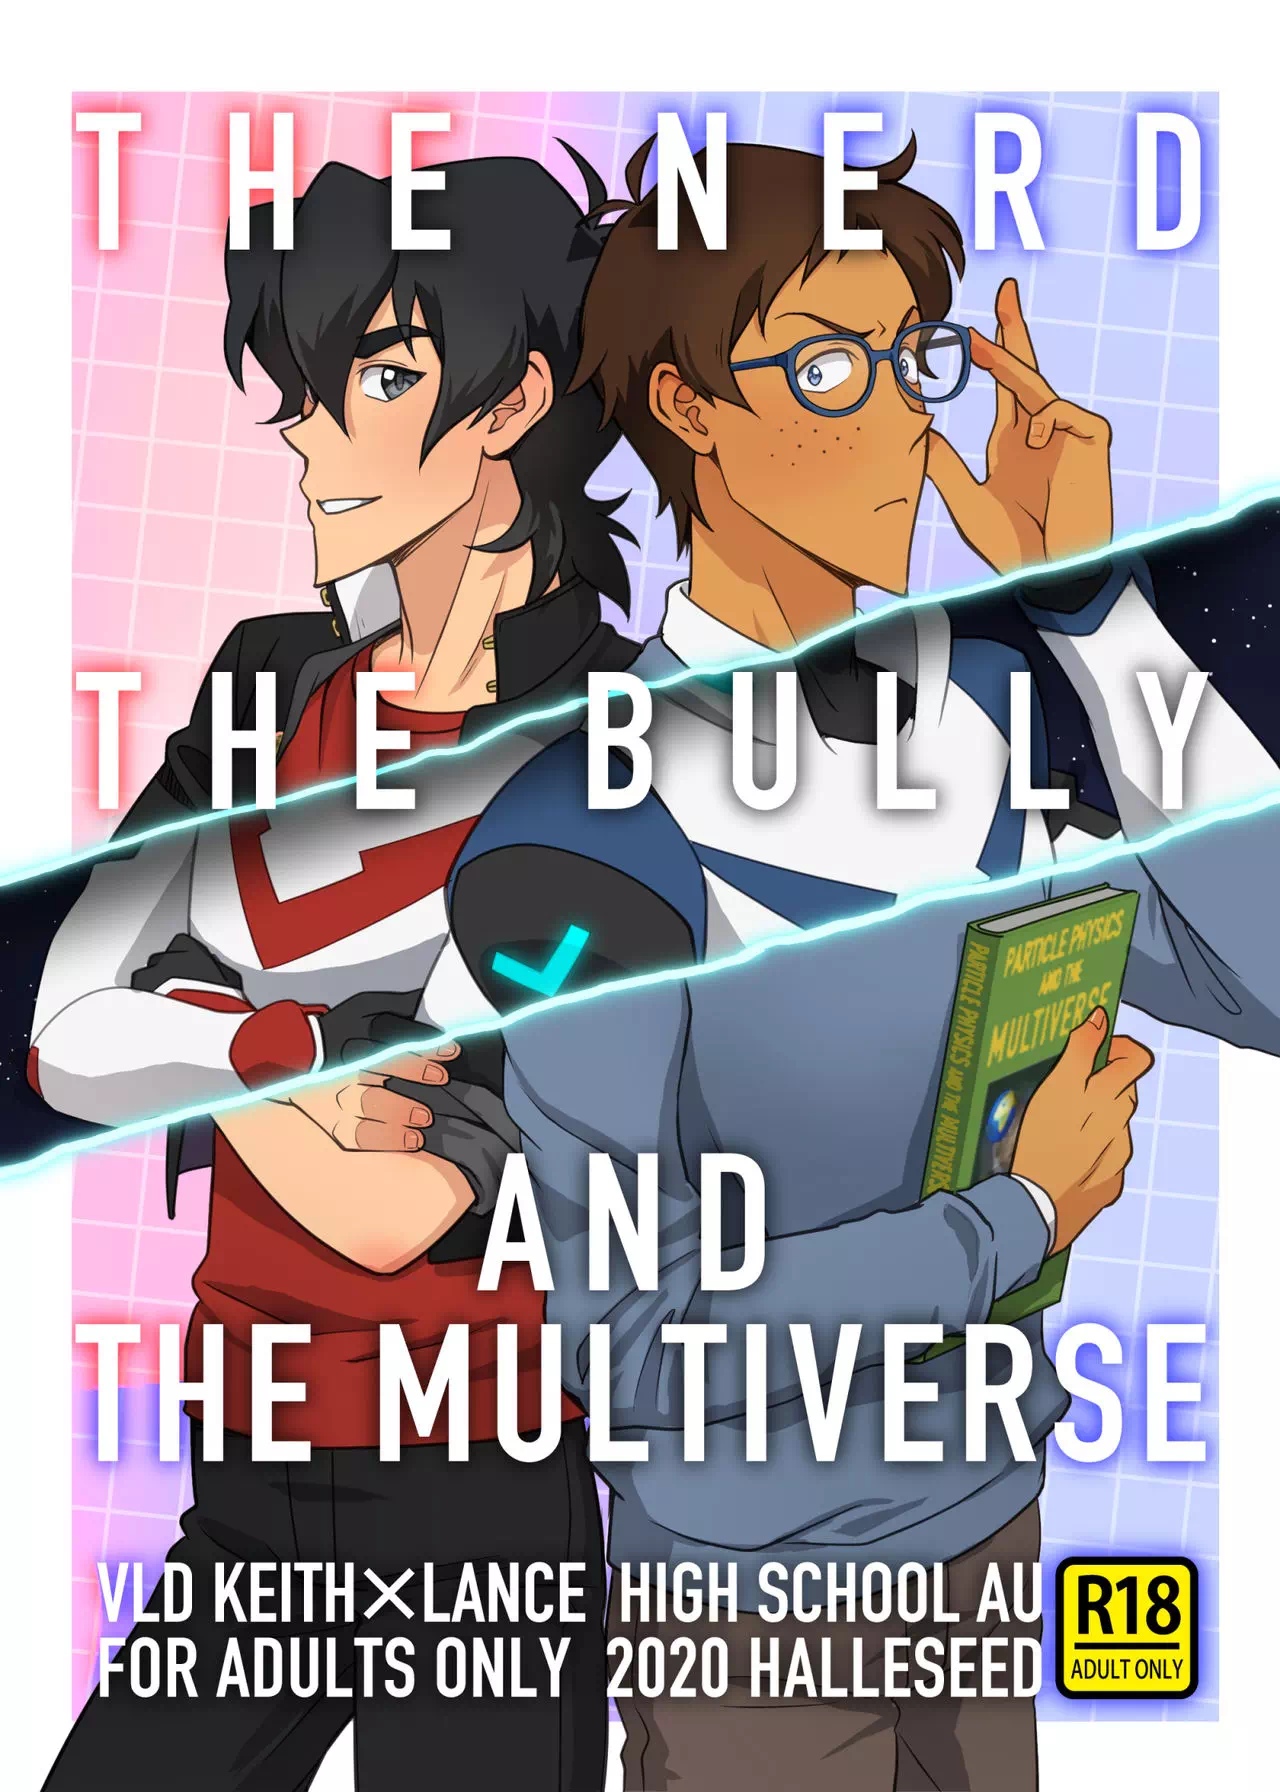 Yaoi porn comics Voltron: Legendary Defender – The nerd, the bully and the multiverse